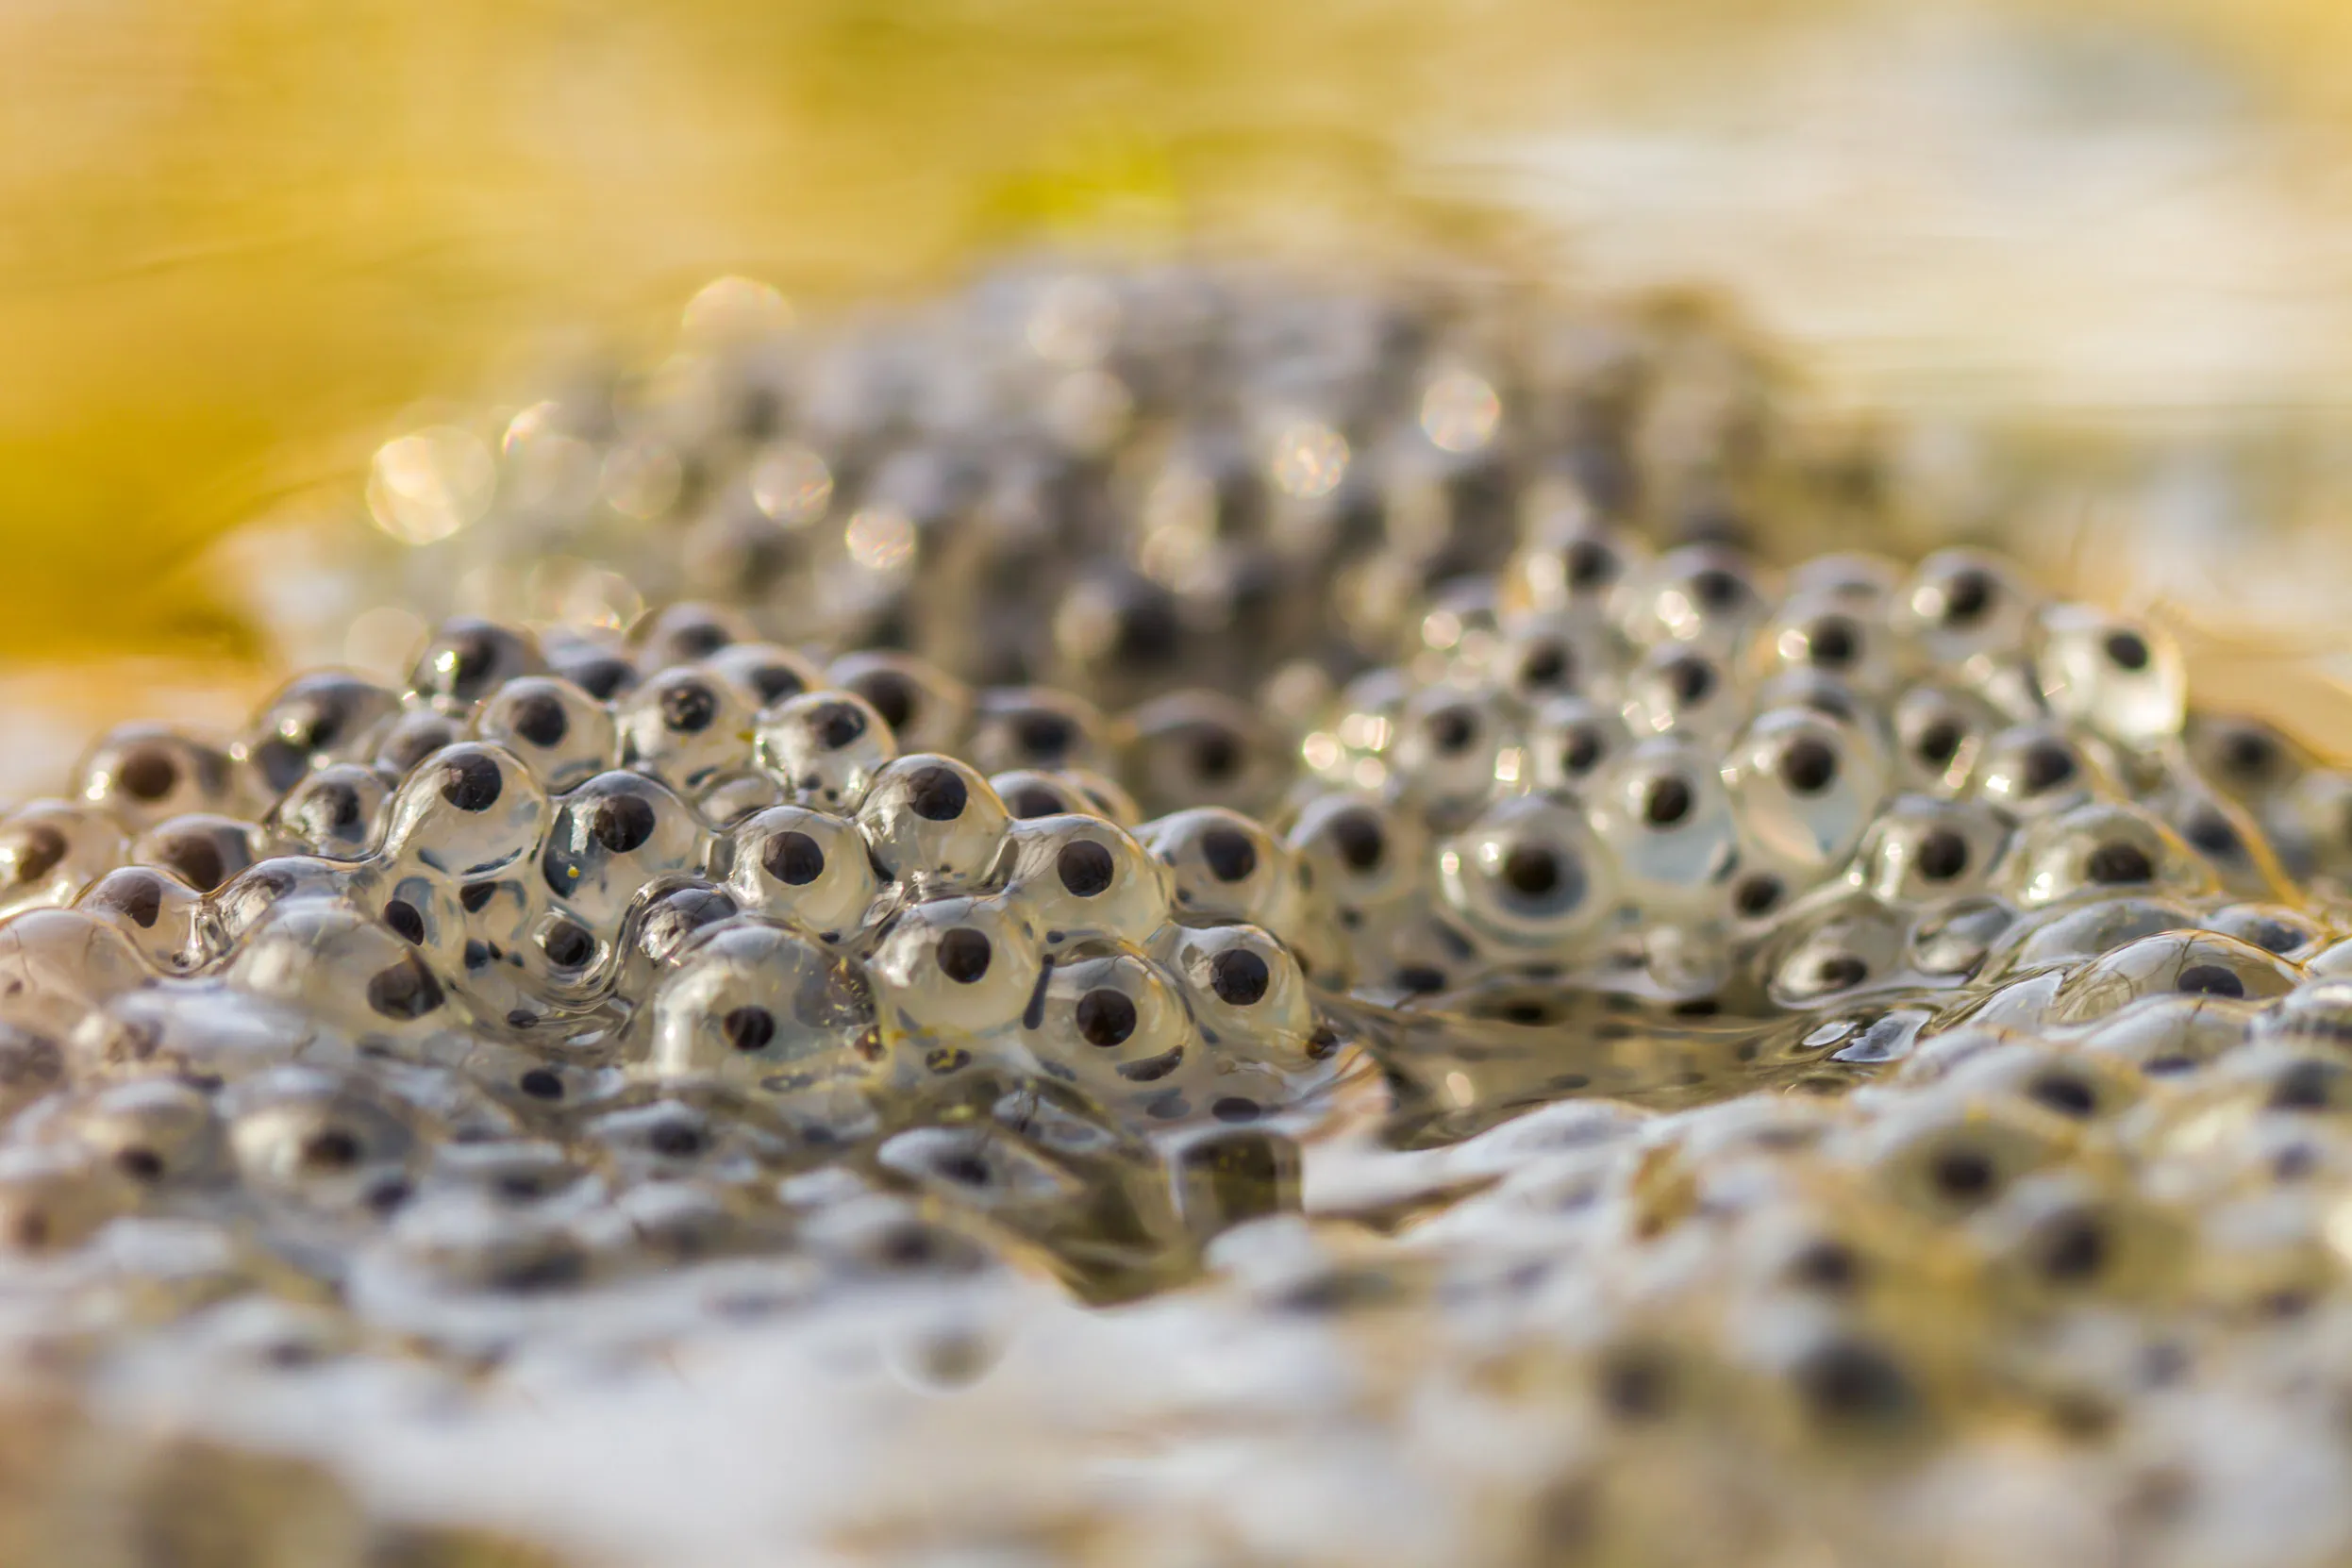 A cluster of Common Frogspawn at the water's edge.